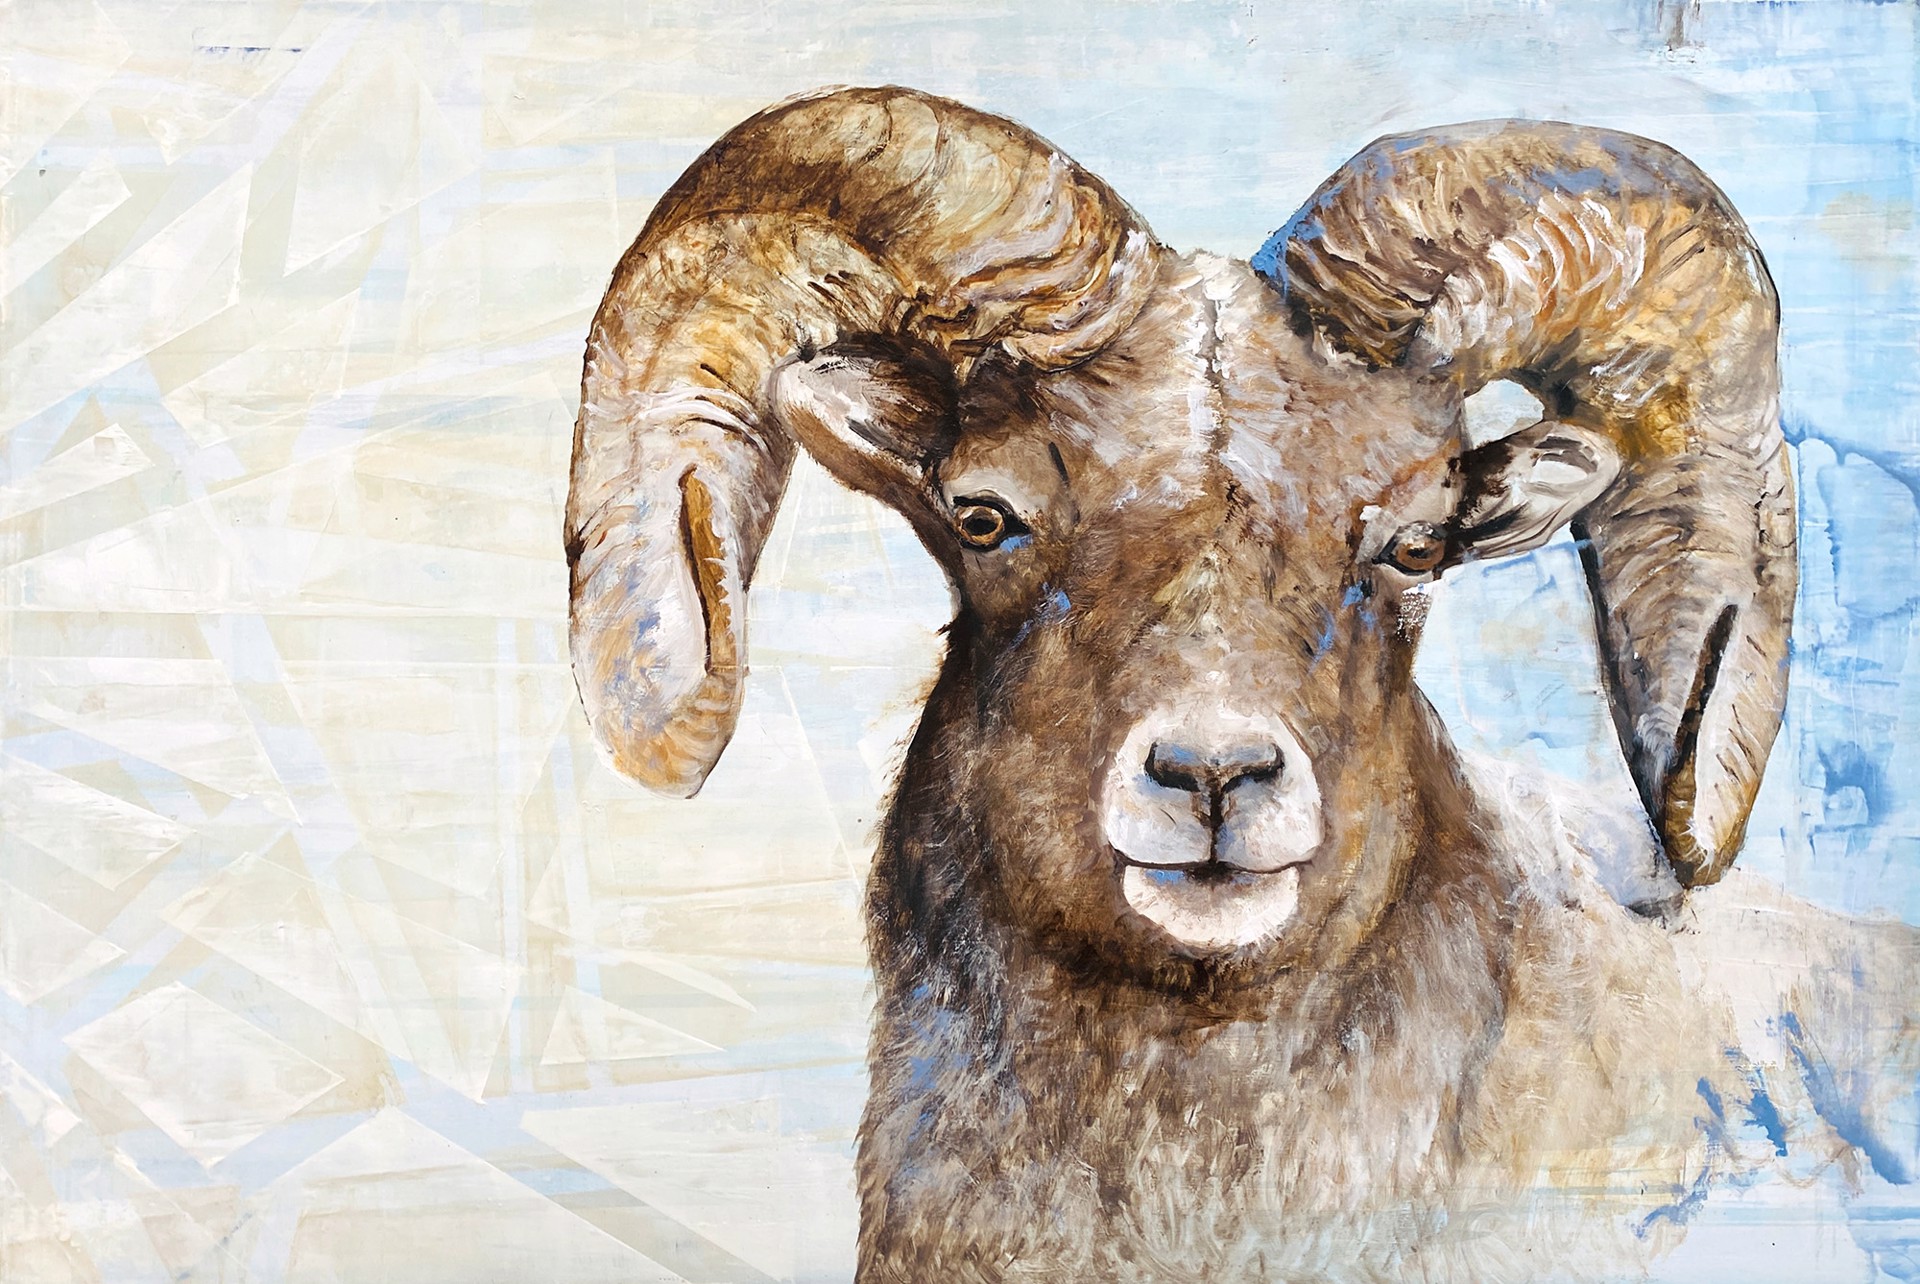 Original Oil Painting By Jenna Von Benedikt Of A Ram In An Abstract Background